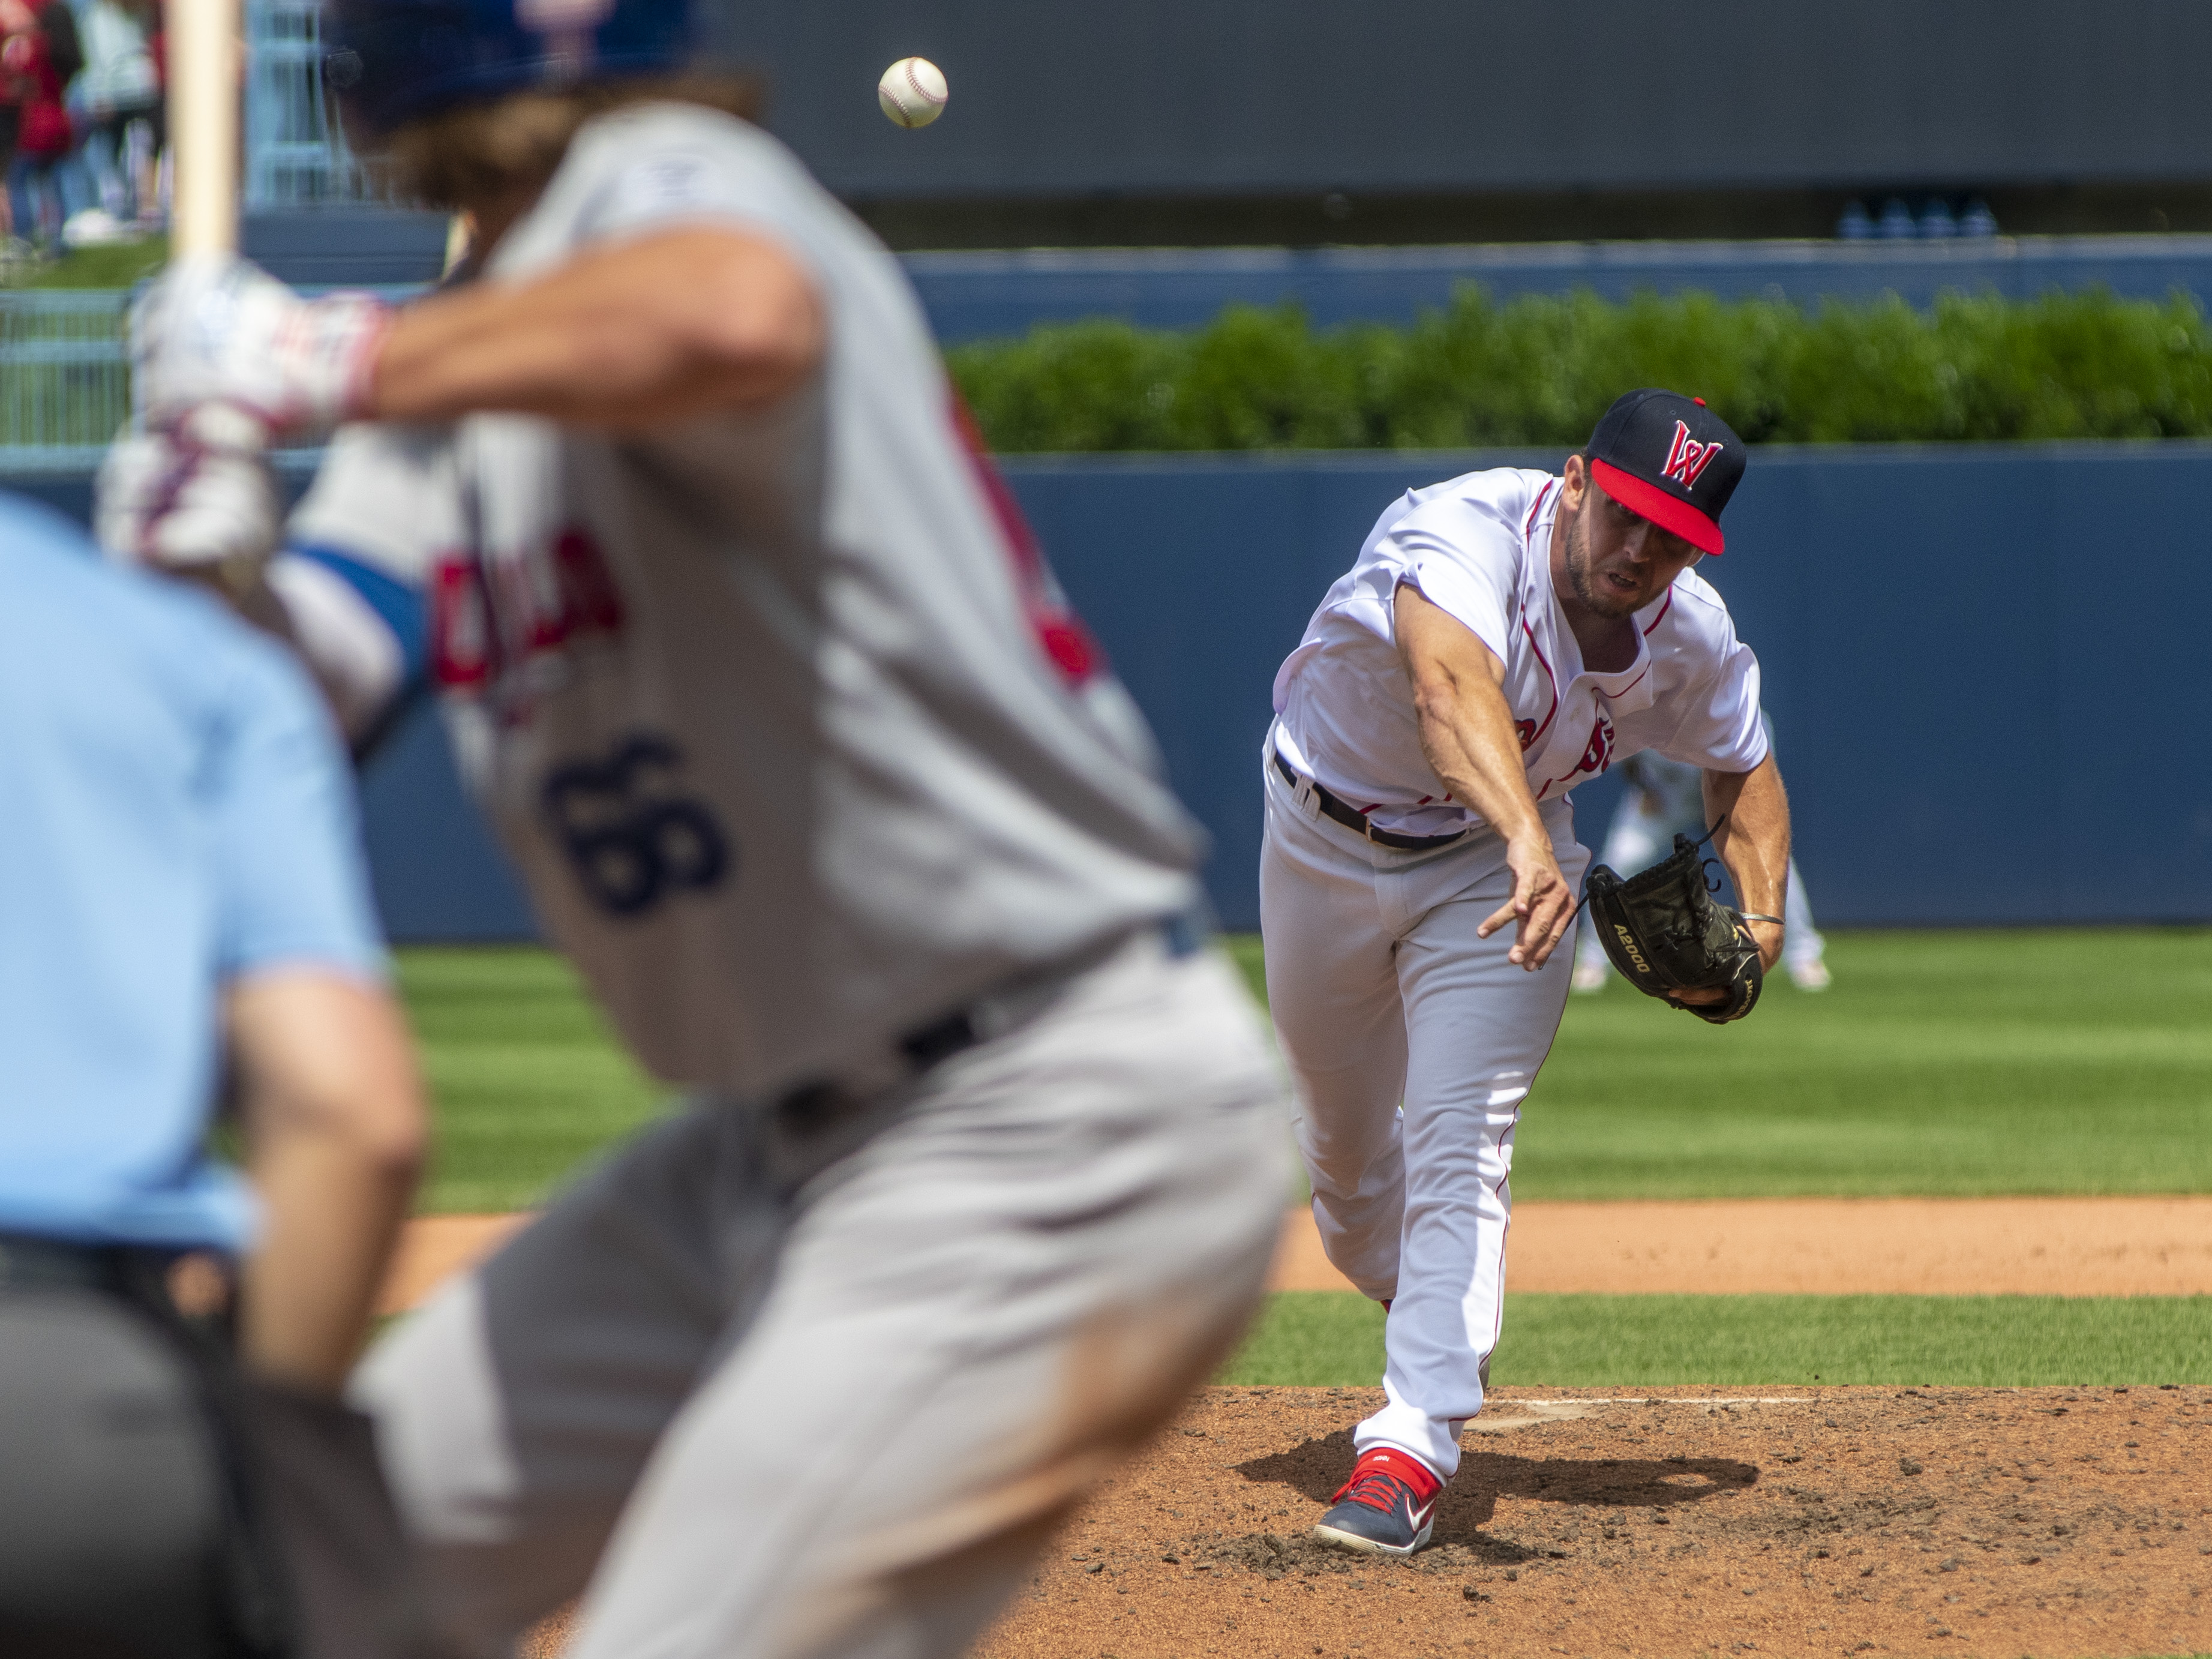 Kutter Crawford wins spot in Boston's rotation